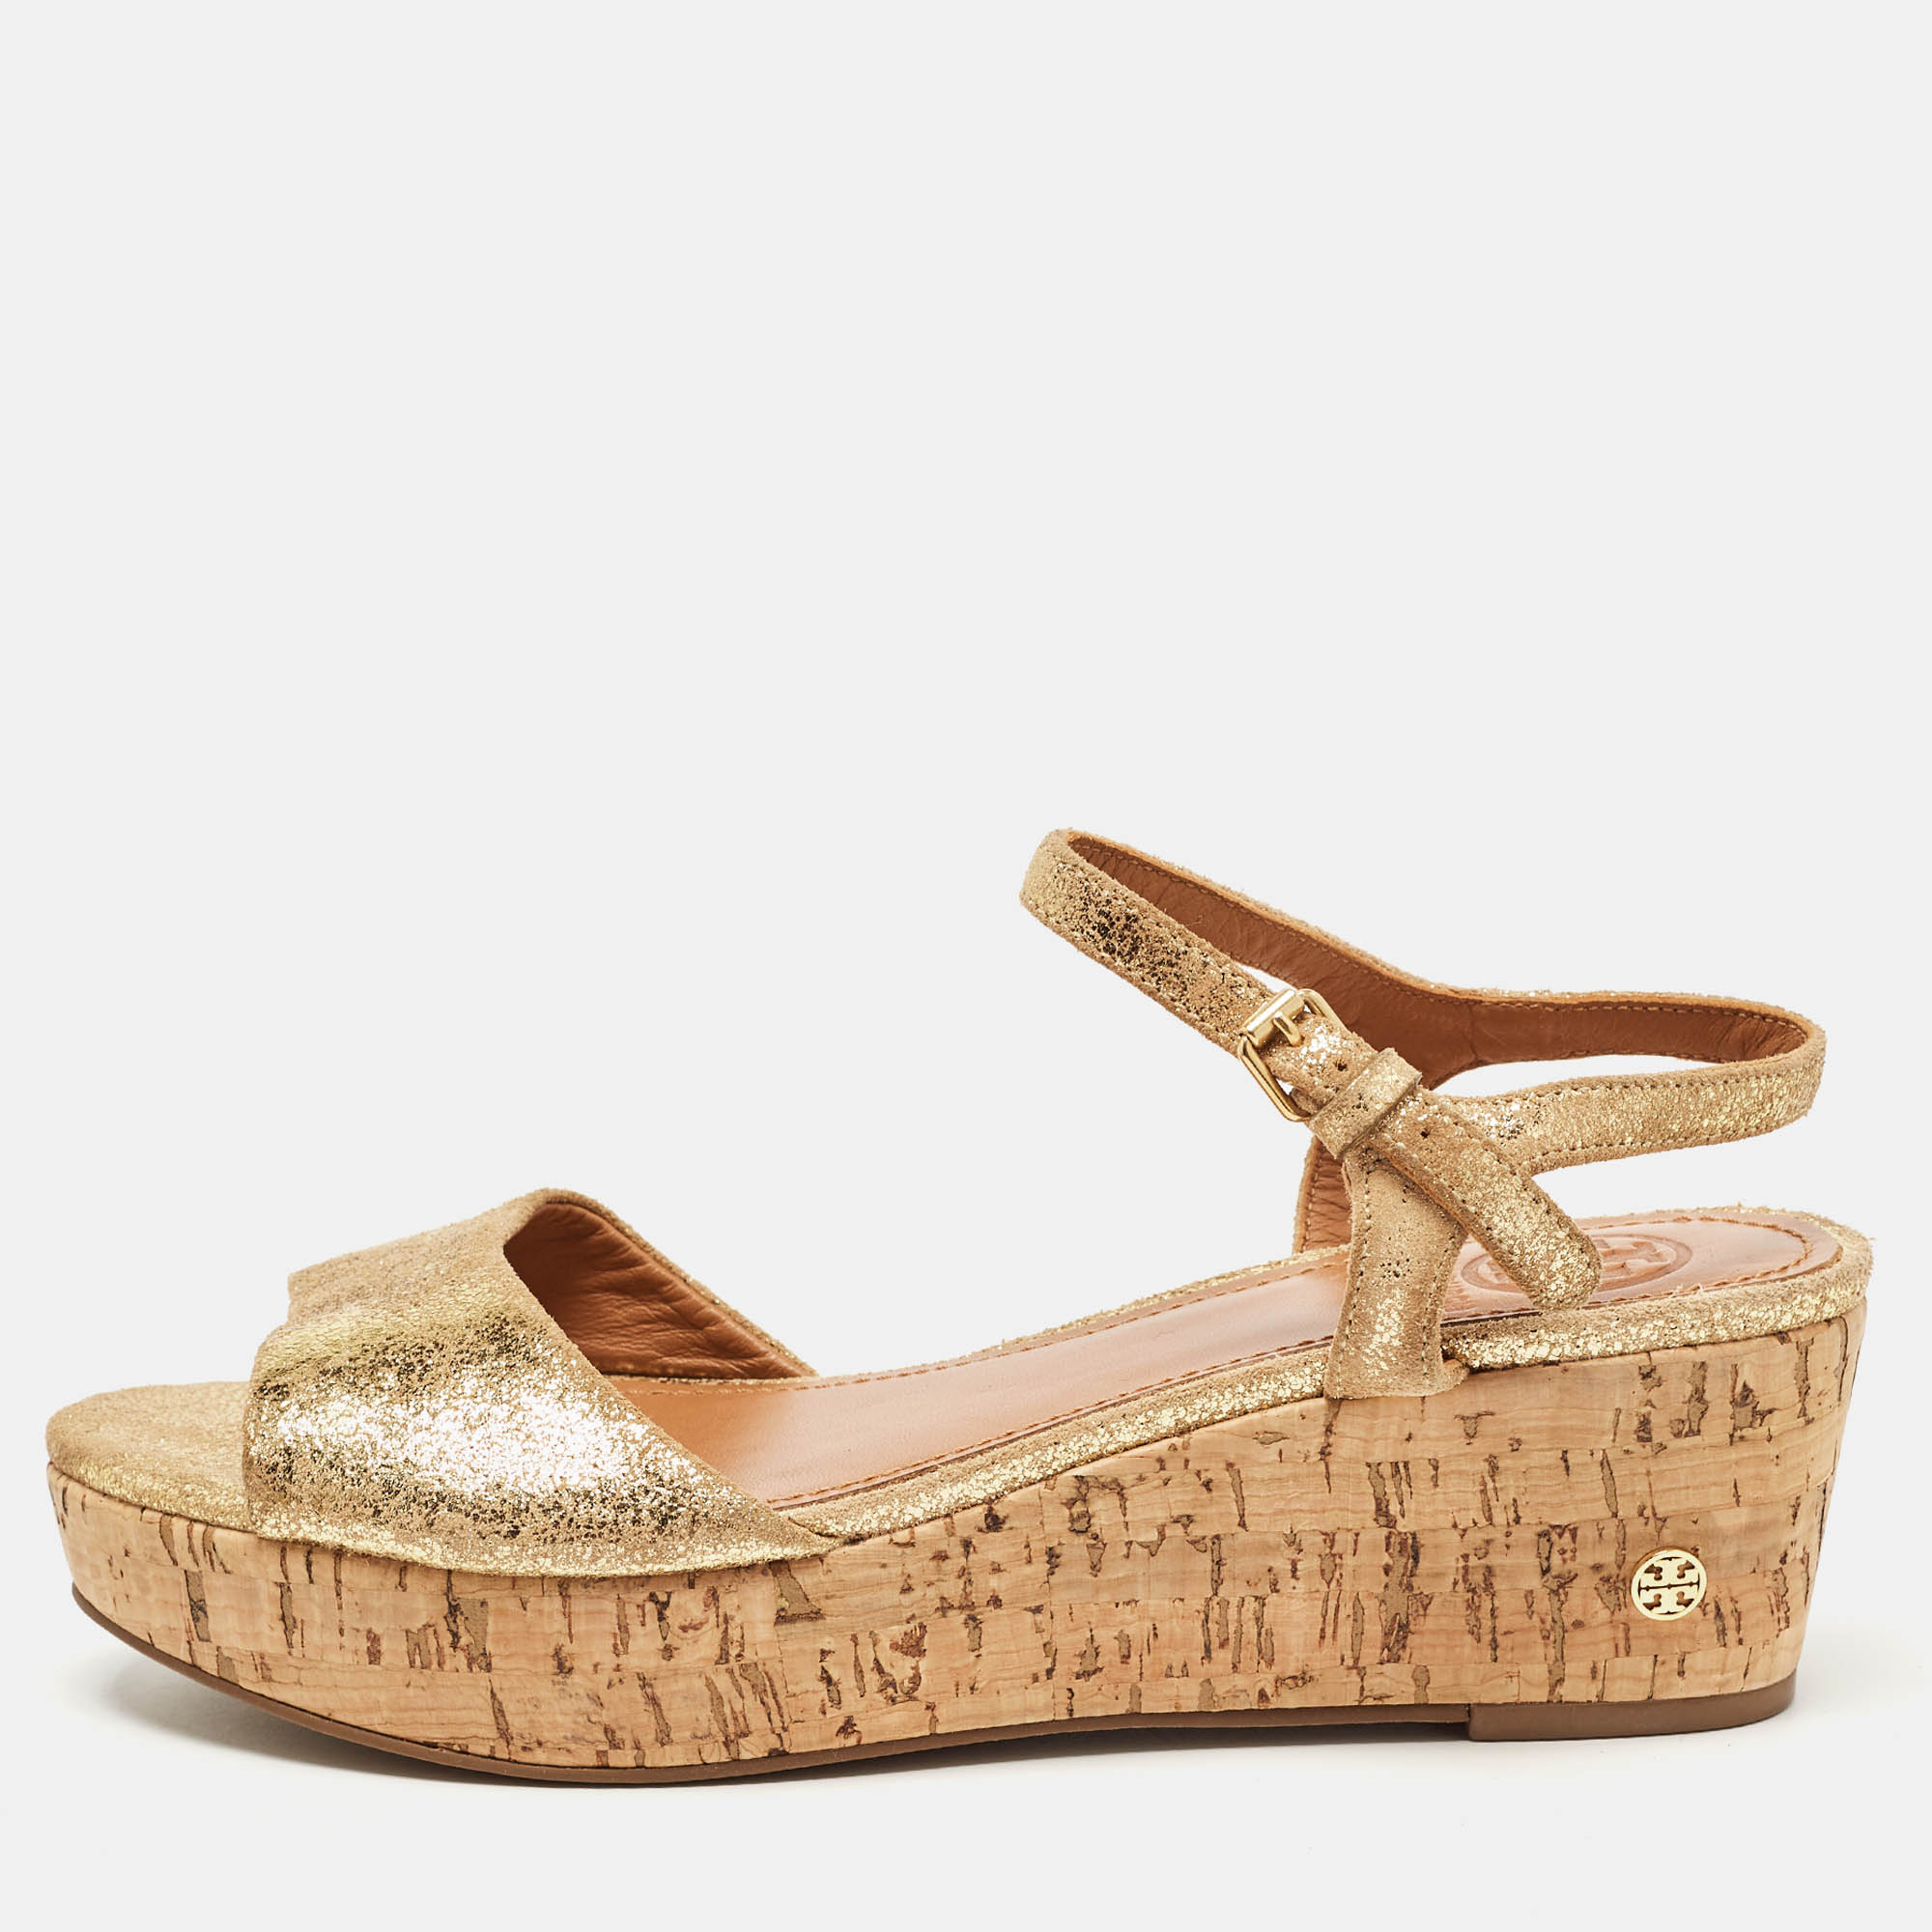 Tory burch gold texture suede wedge ankle strap sandals size 37.5